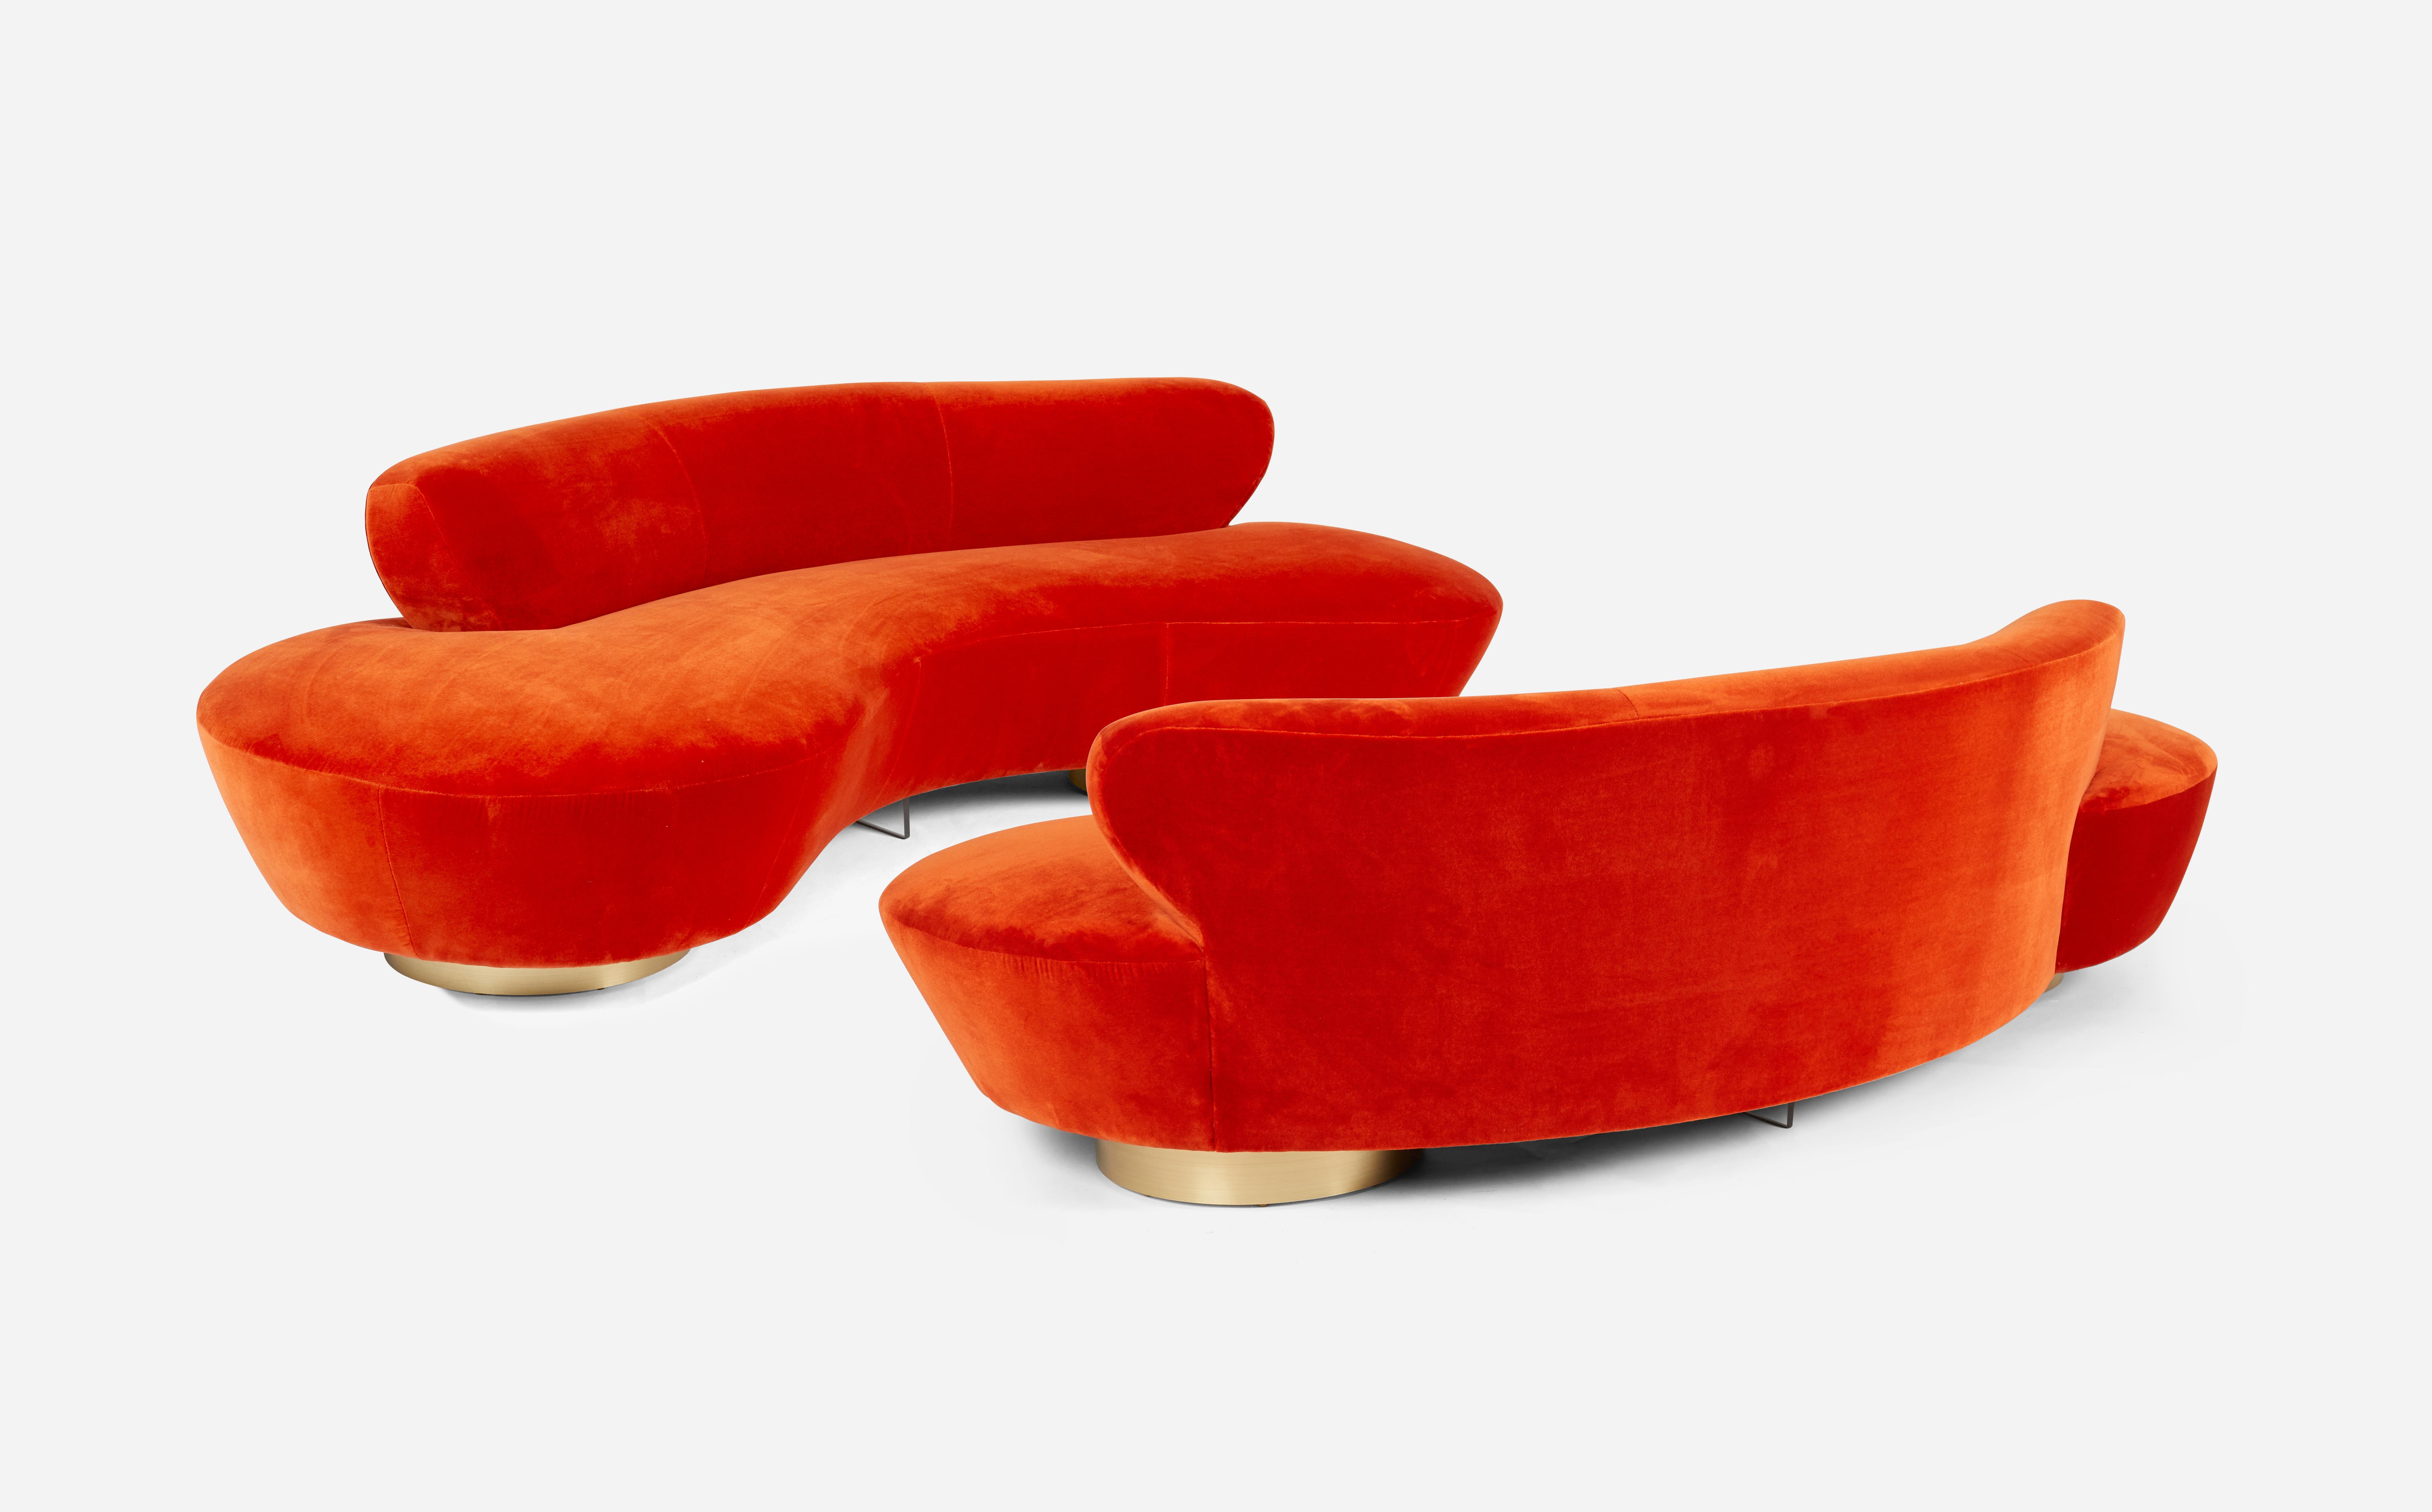 Pair of serpentine sofas designed by Vladimir Kagan for Directional Furniture. Fully restored and reupholstered in vibrant coral velvet.